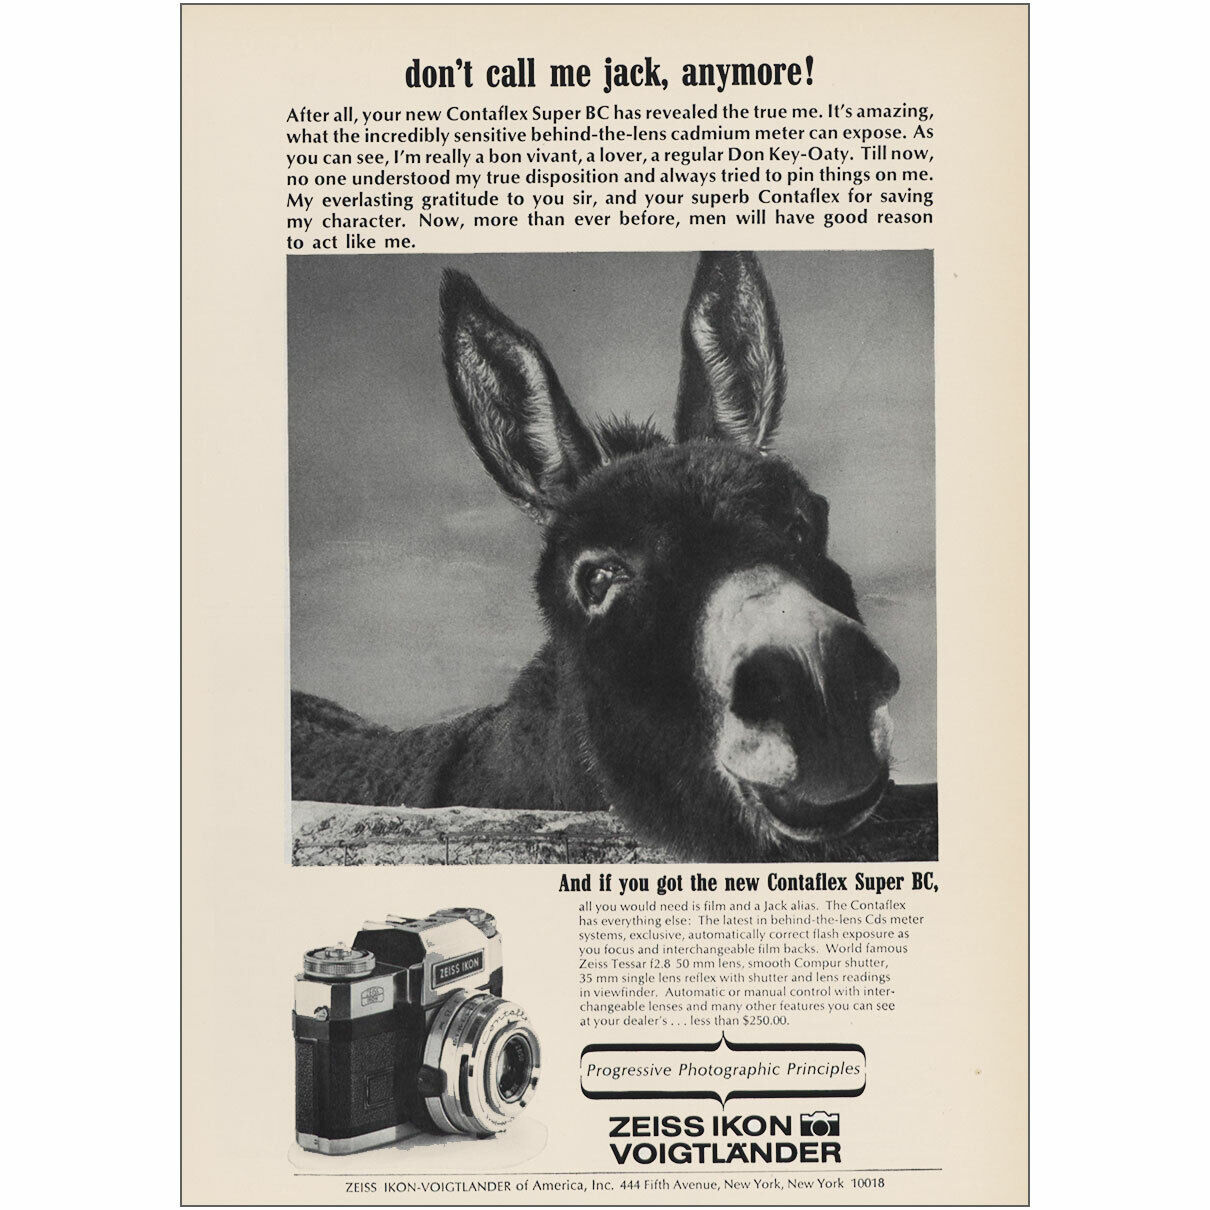 1966 Zeiss Icon Voigtlander: Don’t Call Me Jack Anymore Vintage Print Ad